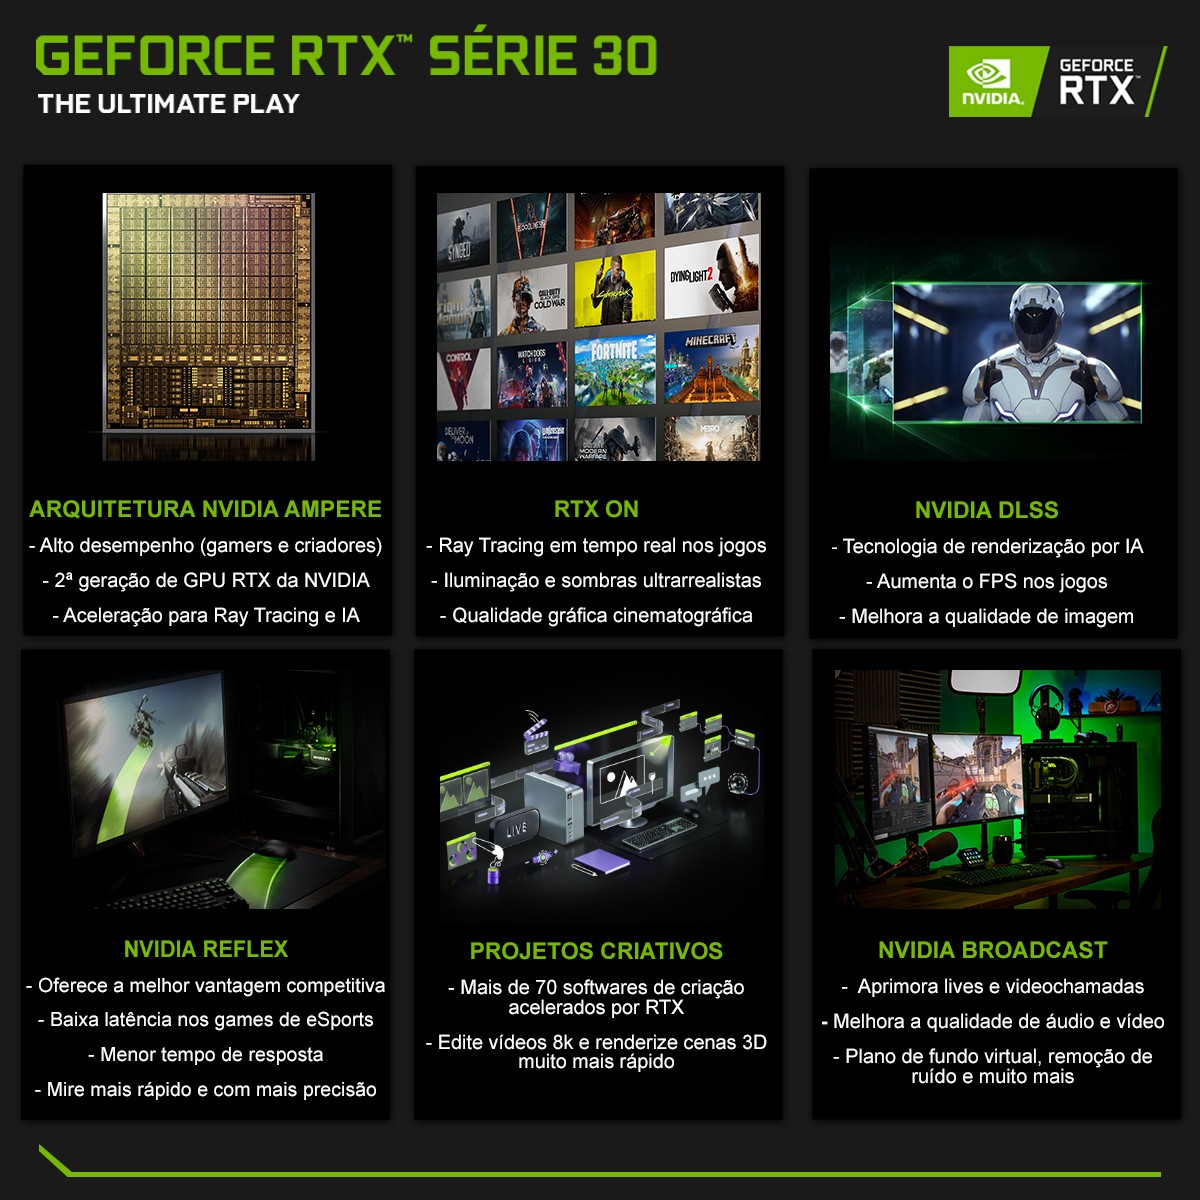 Placa de Vídeo Colorful iGame GeForce RTX 3070 Neptune OC LHR-V, 8GB, GDDR6, DLSS, Ray Tracing